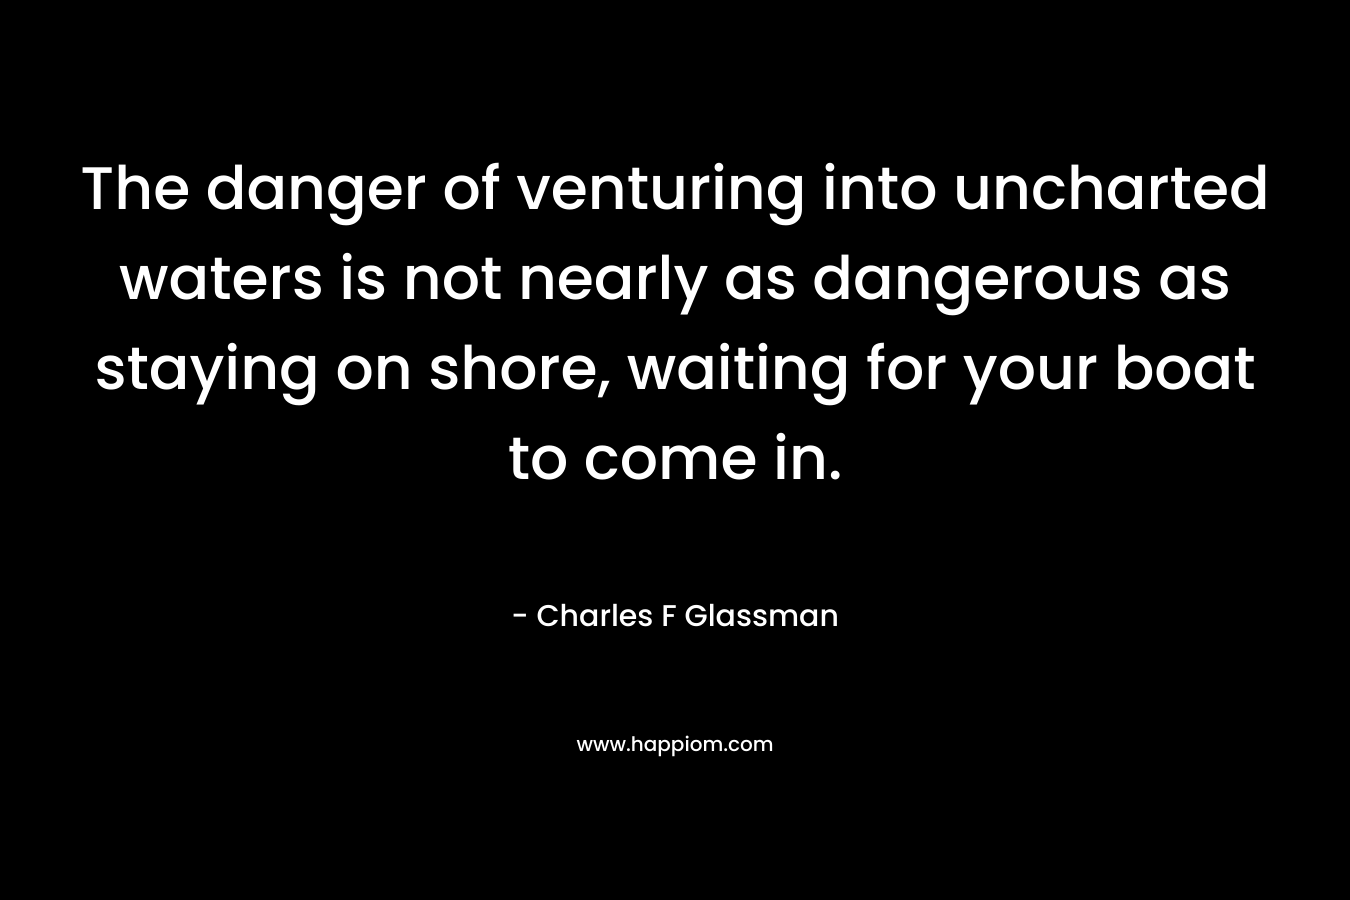 The danger of venturing into uncharted waters is not nearly as dangerous as staying on shore, waiting for your boat to come in.